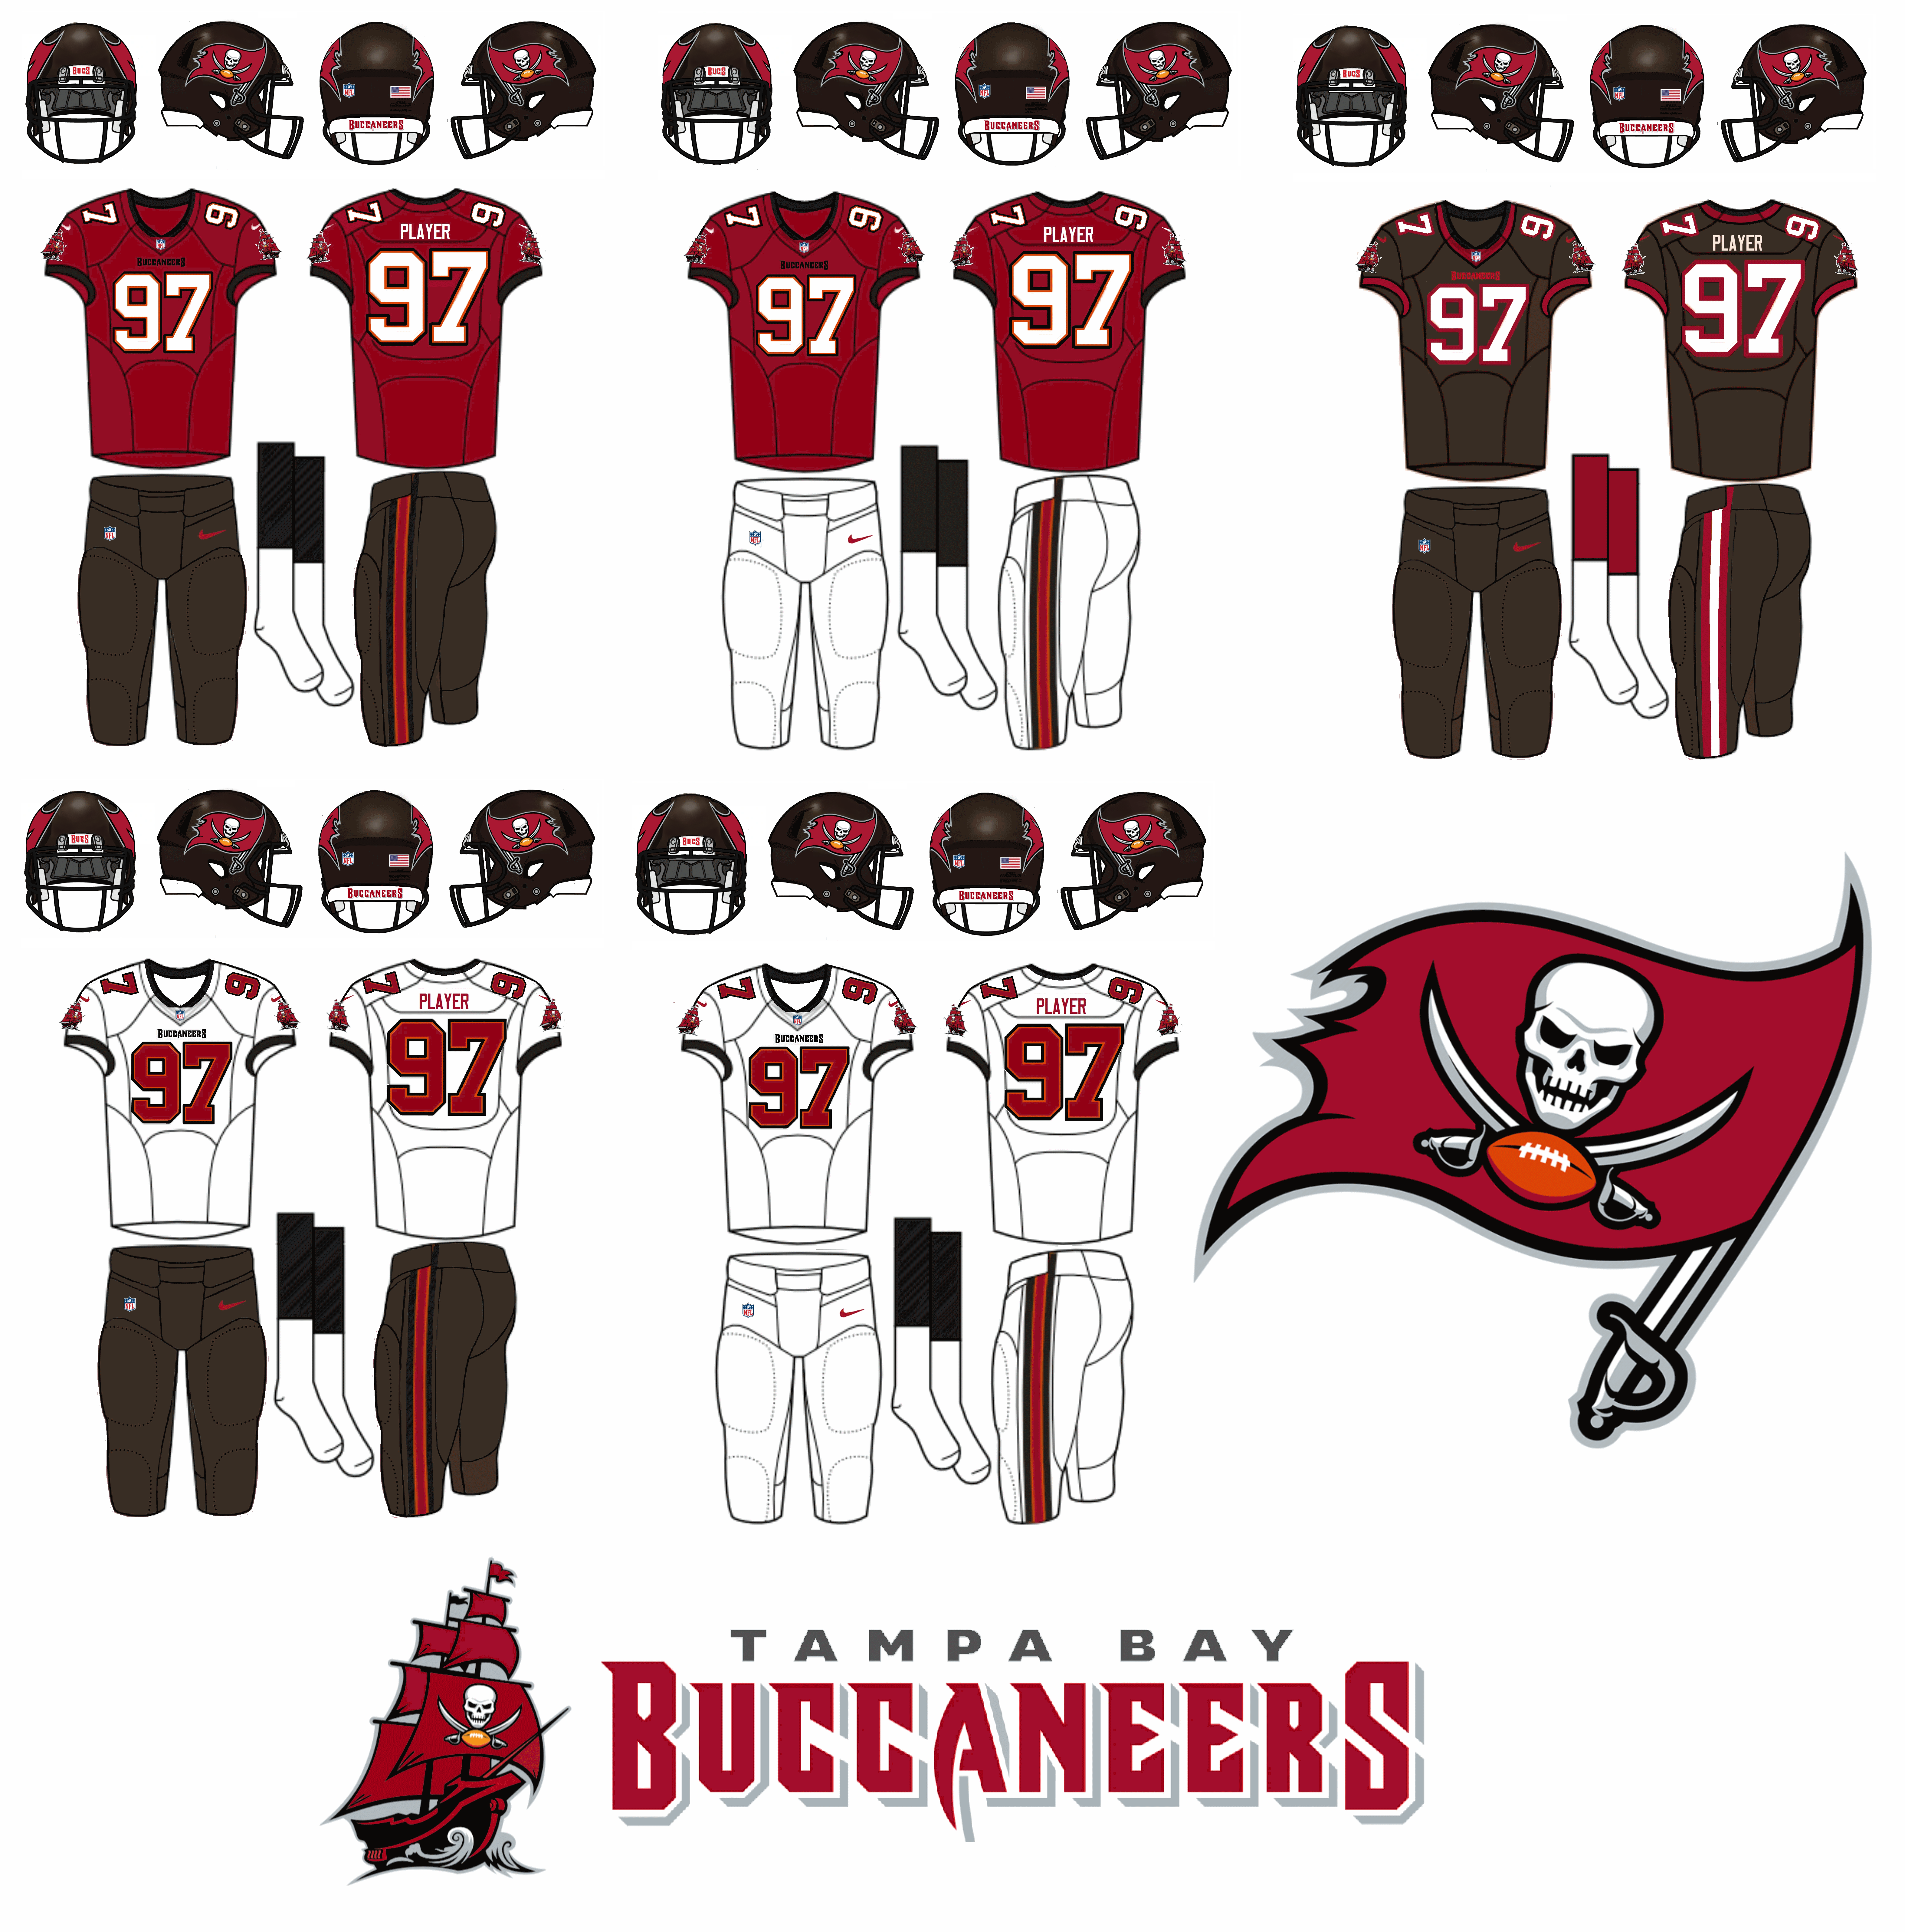 In the Current  Tampa Bay Buccaneers